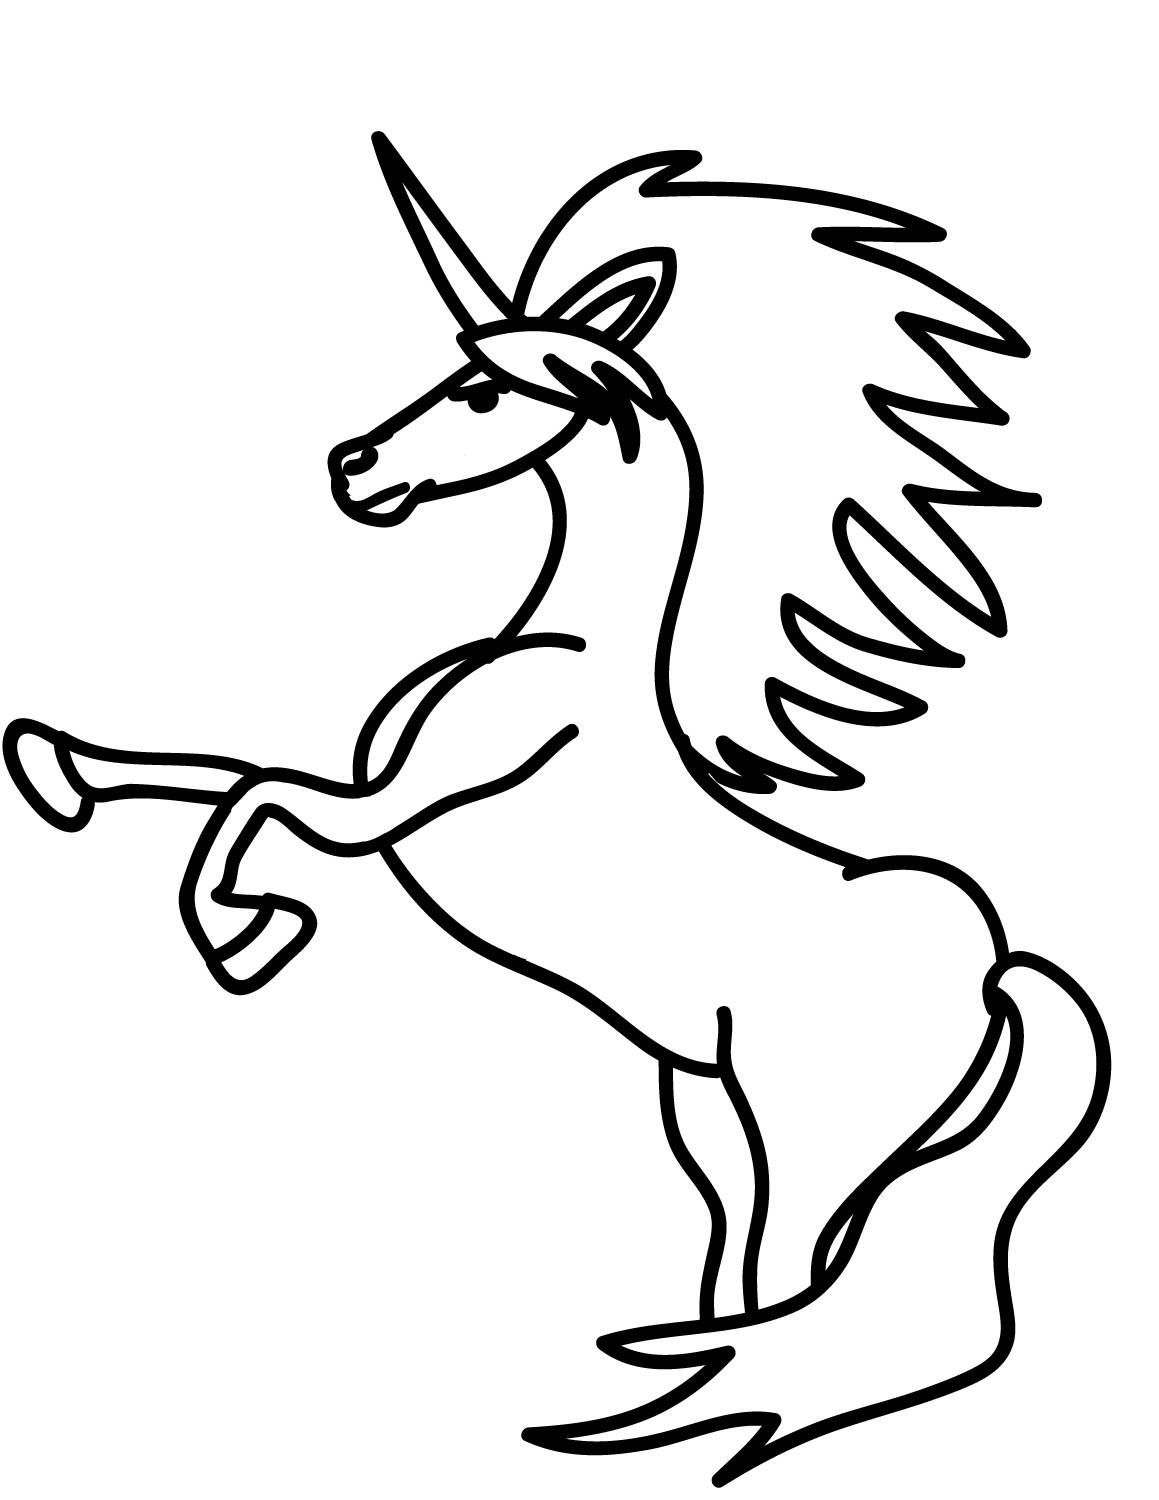 Simple Unicorn Coloring Page